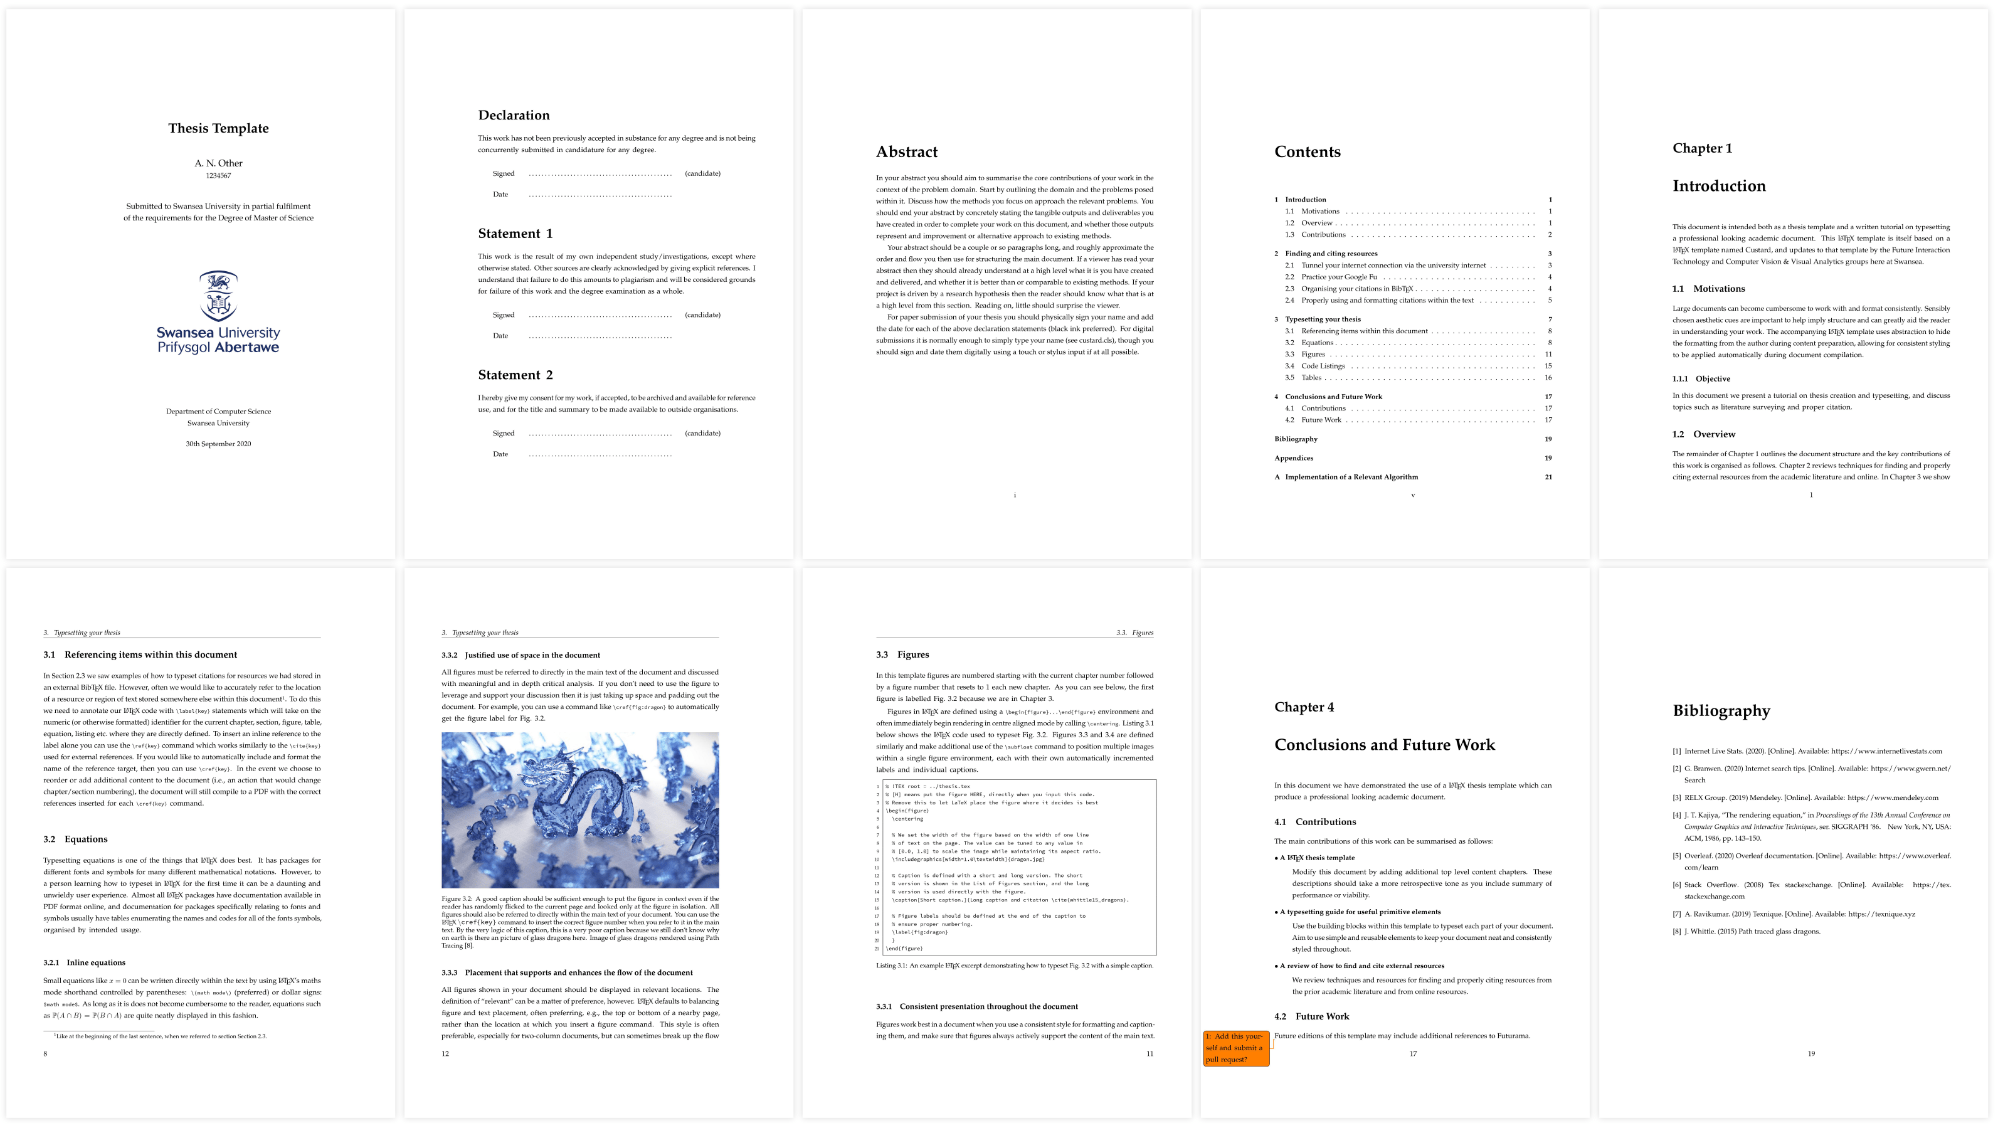 Sample pages from this thesis template